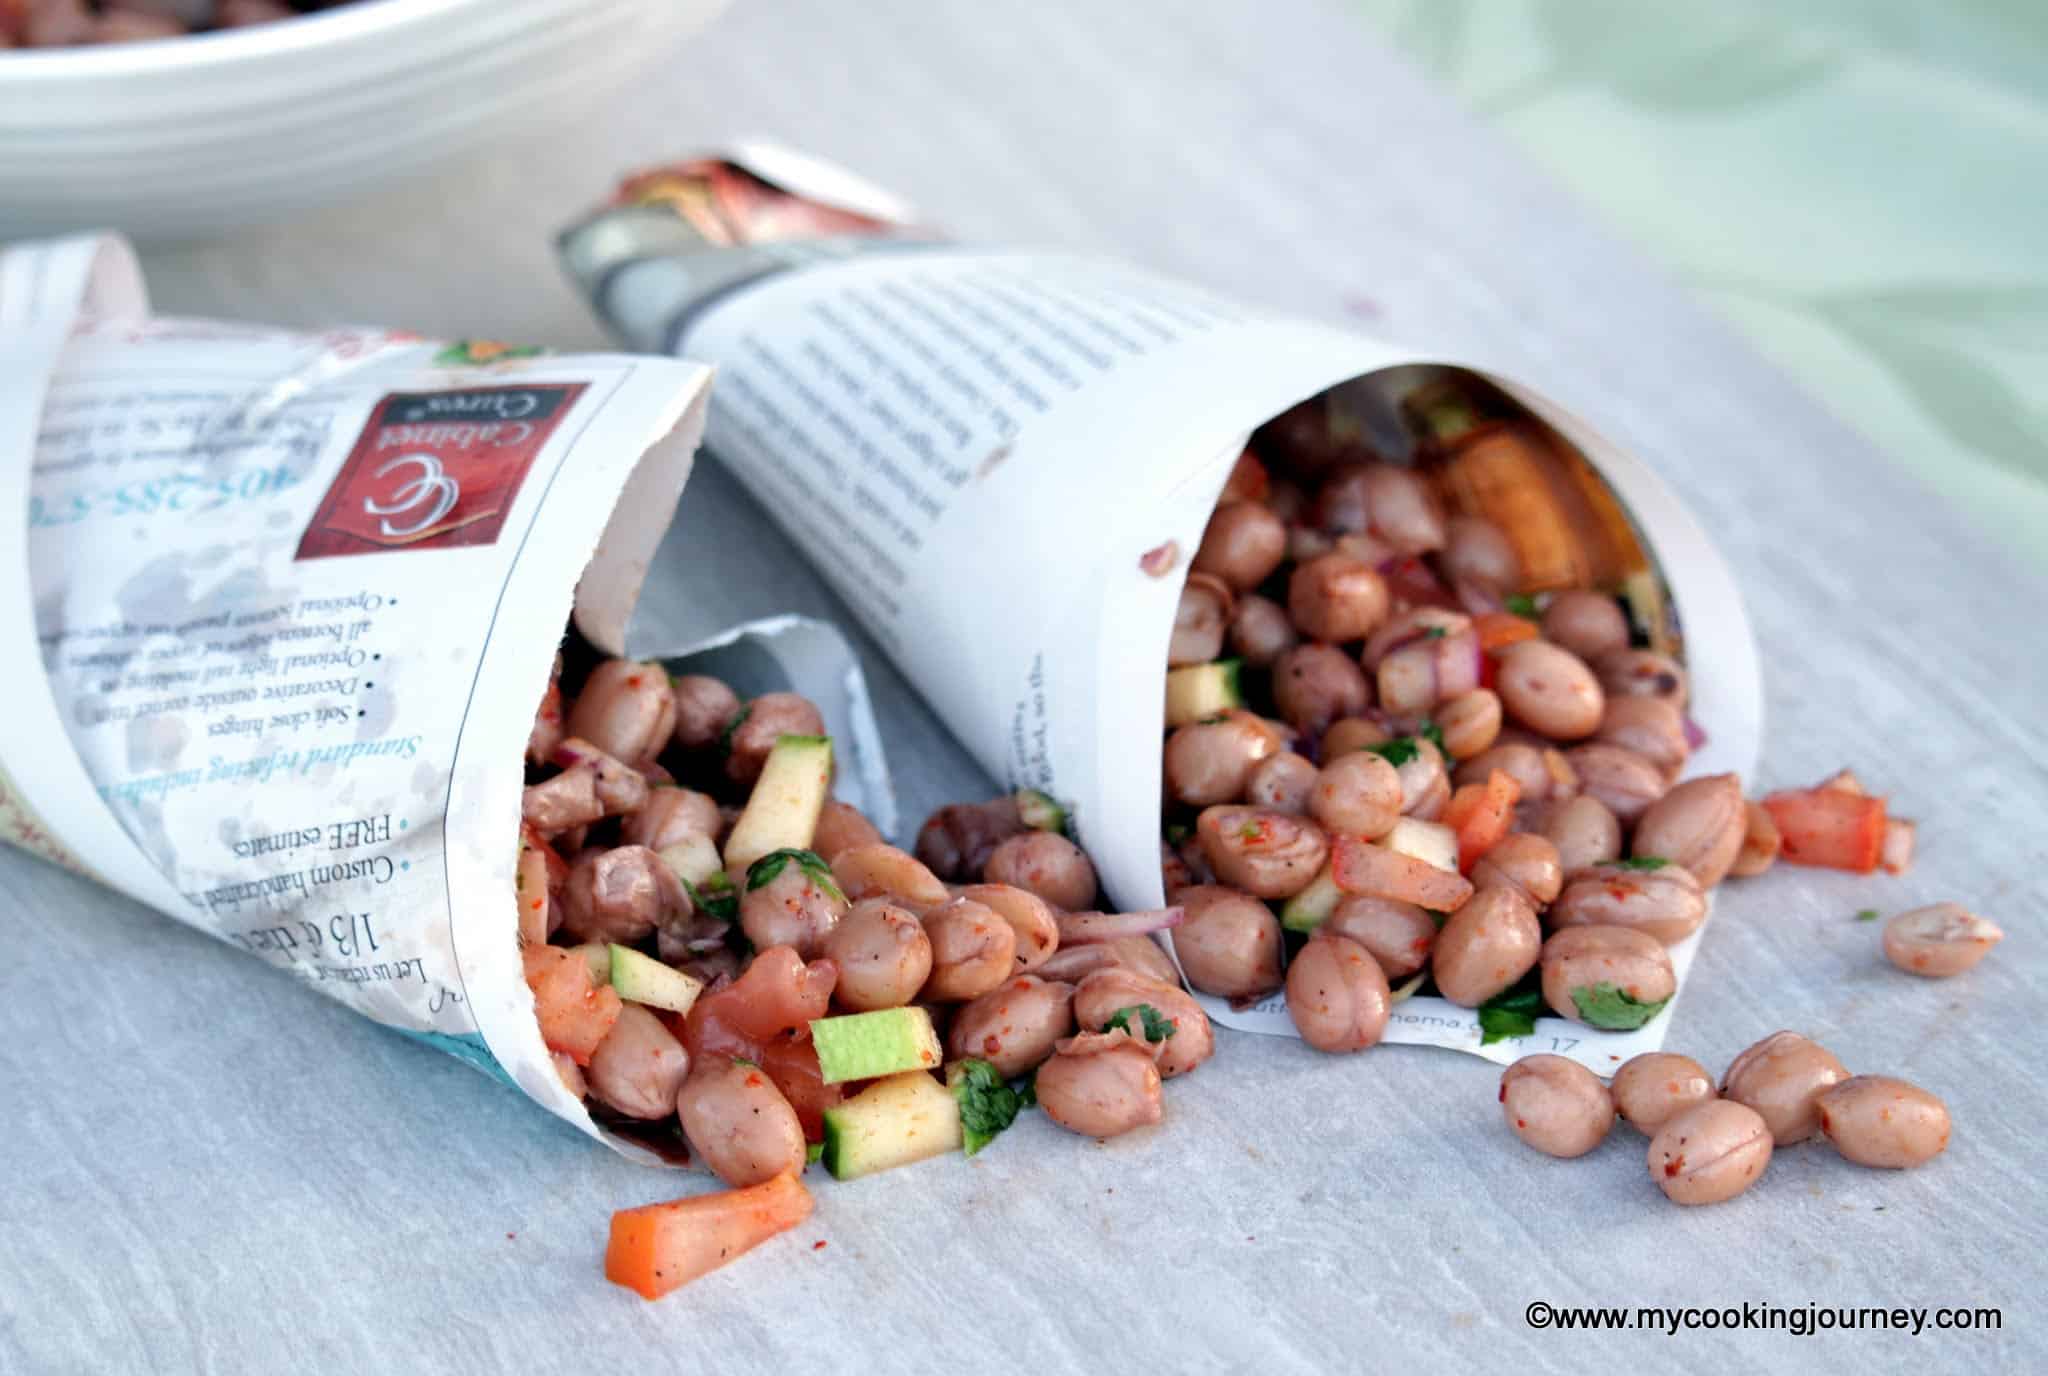 Spiced peanuts in 2 paper cones